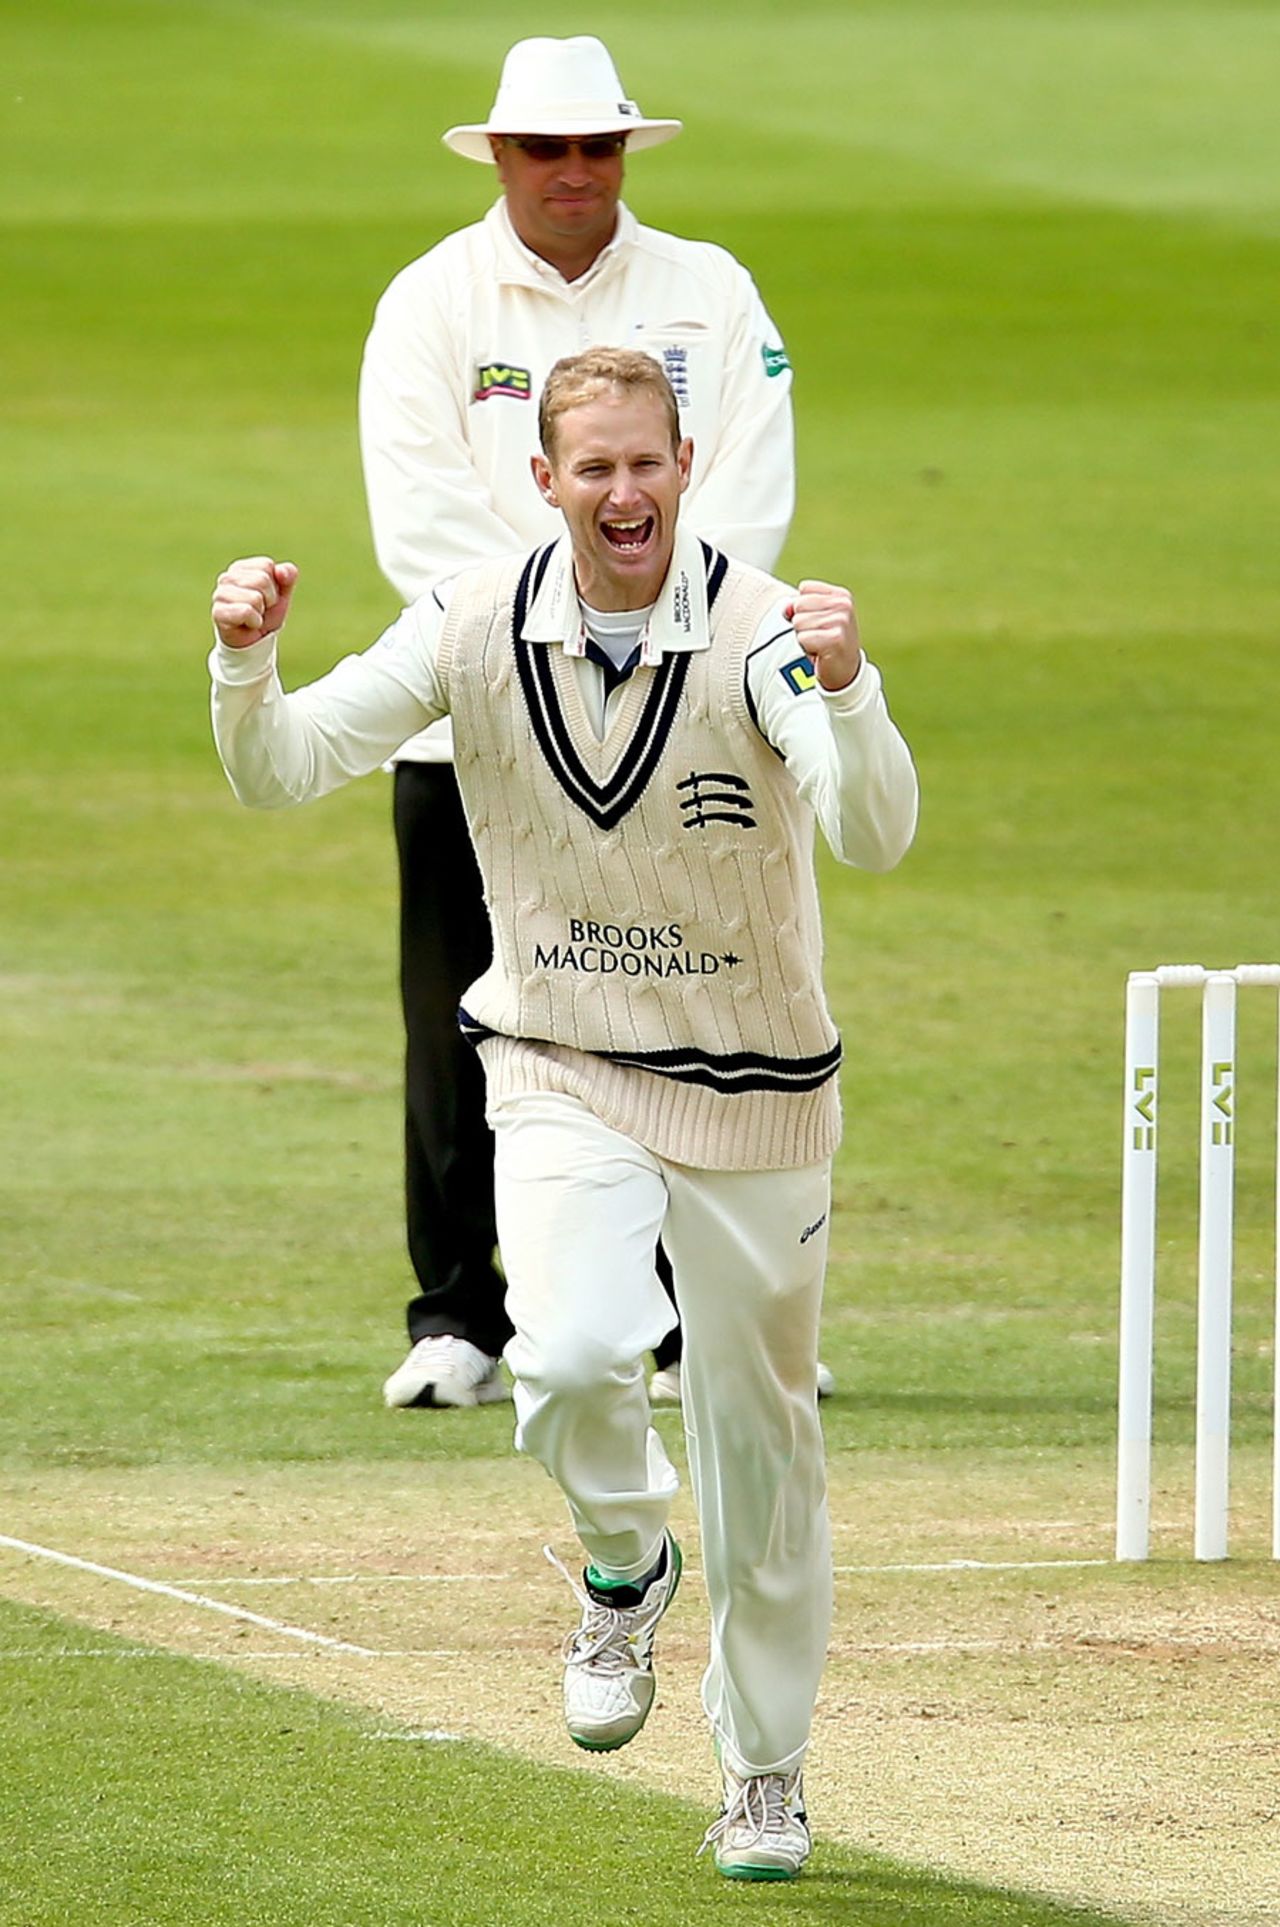 Adam Voges picked up the big wicket of Keaton Jennings, Middlesex v Durham, County Championship Division One, Lord's, 3rd day, May 4, 2015